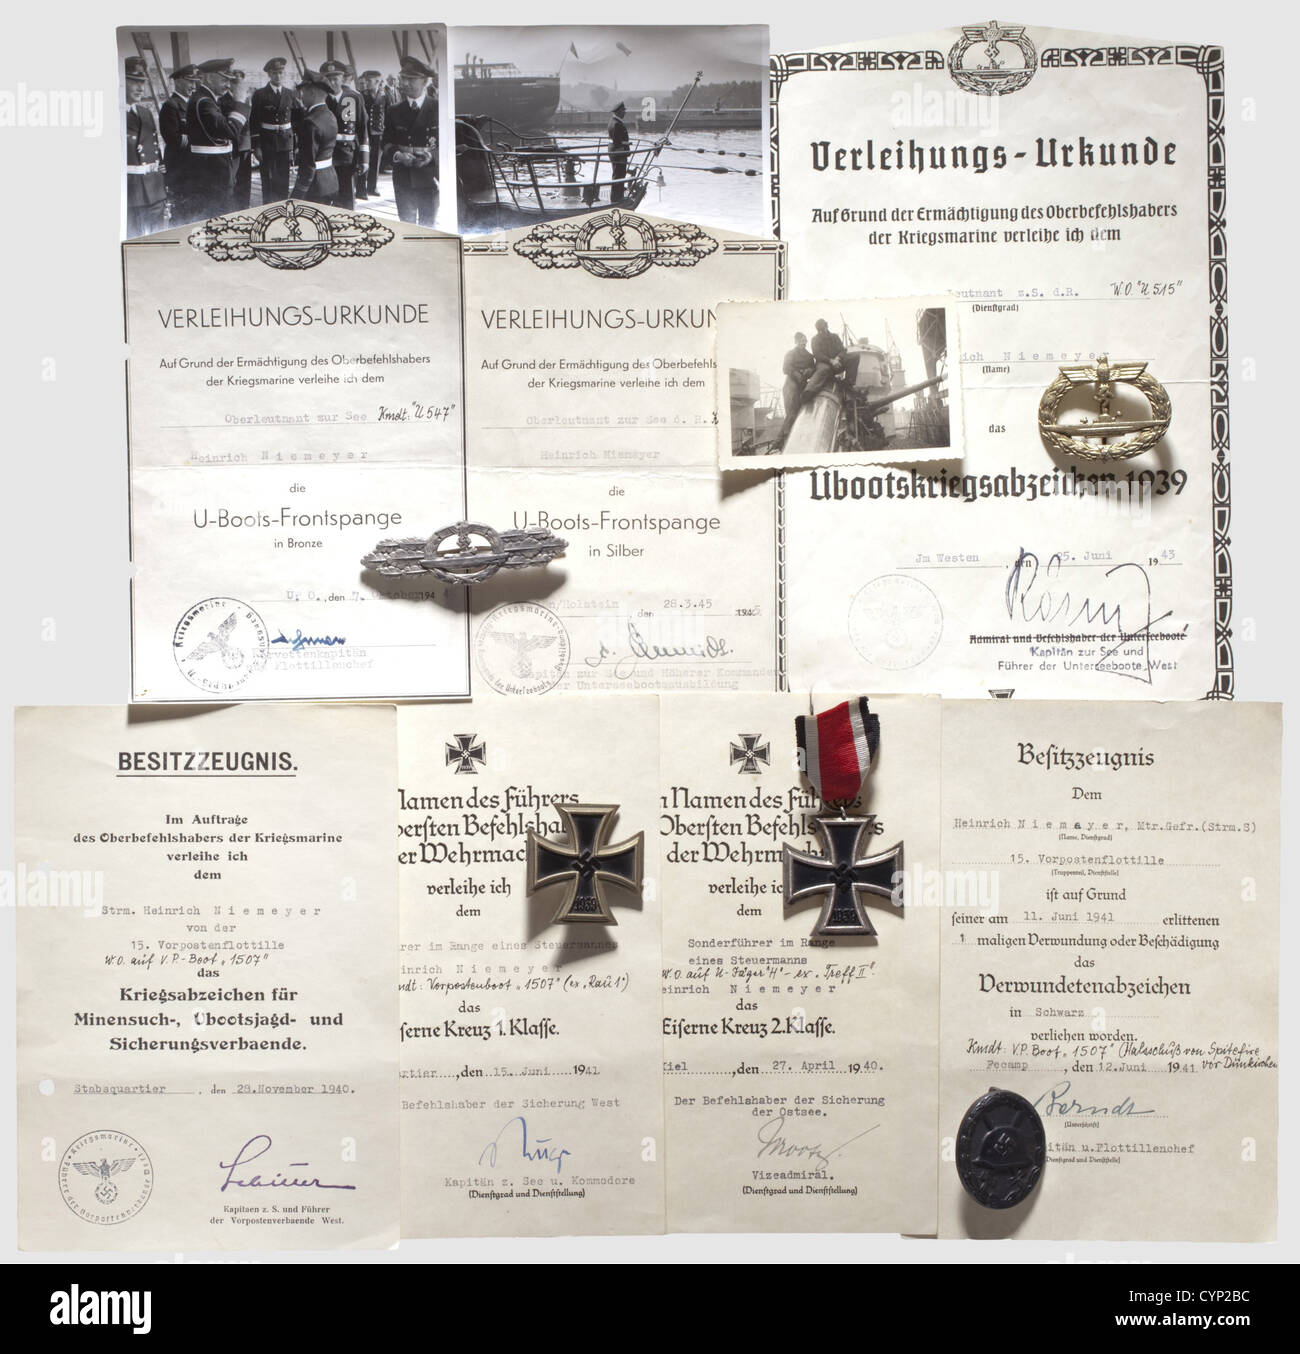 Awards and documents of U-Boat Commander Olt.z.S. Heinrich Niemeyer, U-Boat Front Clasp in Silver (corrosion), fine zinc issue by Schwerin, Berlin with award document (trimmed) dated 28 March 1945 as C.O. of 'U-3532', award document (trimmed) for the U-Boat Front clasp in Bronze dated 7 historic, historical, people, 1930s, 20th century, navy, naval forces, military, militaria, branch of service, branches of service, armed forces, armed service, object, objects, stills, clipping, clippings, cut out, cut-out, cut-outs, Additional-Rights-Clearences-Not Available Stock Photo